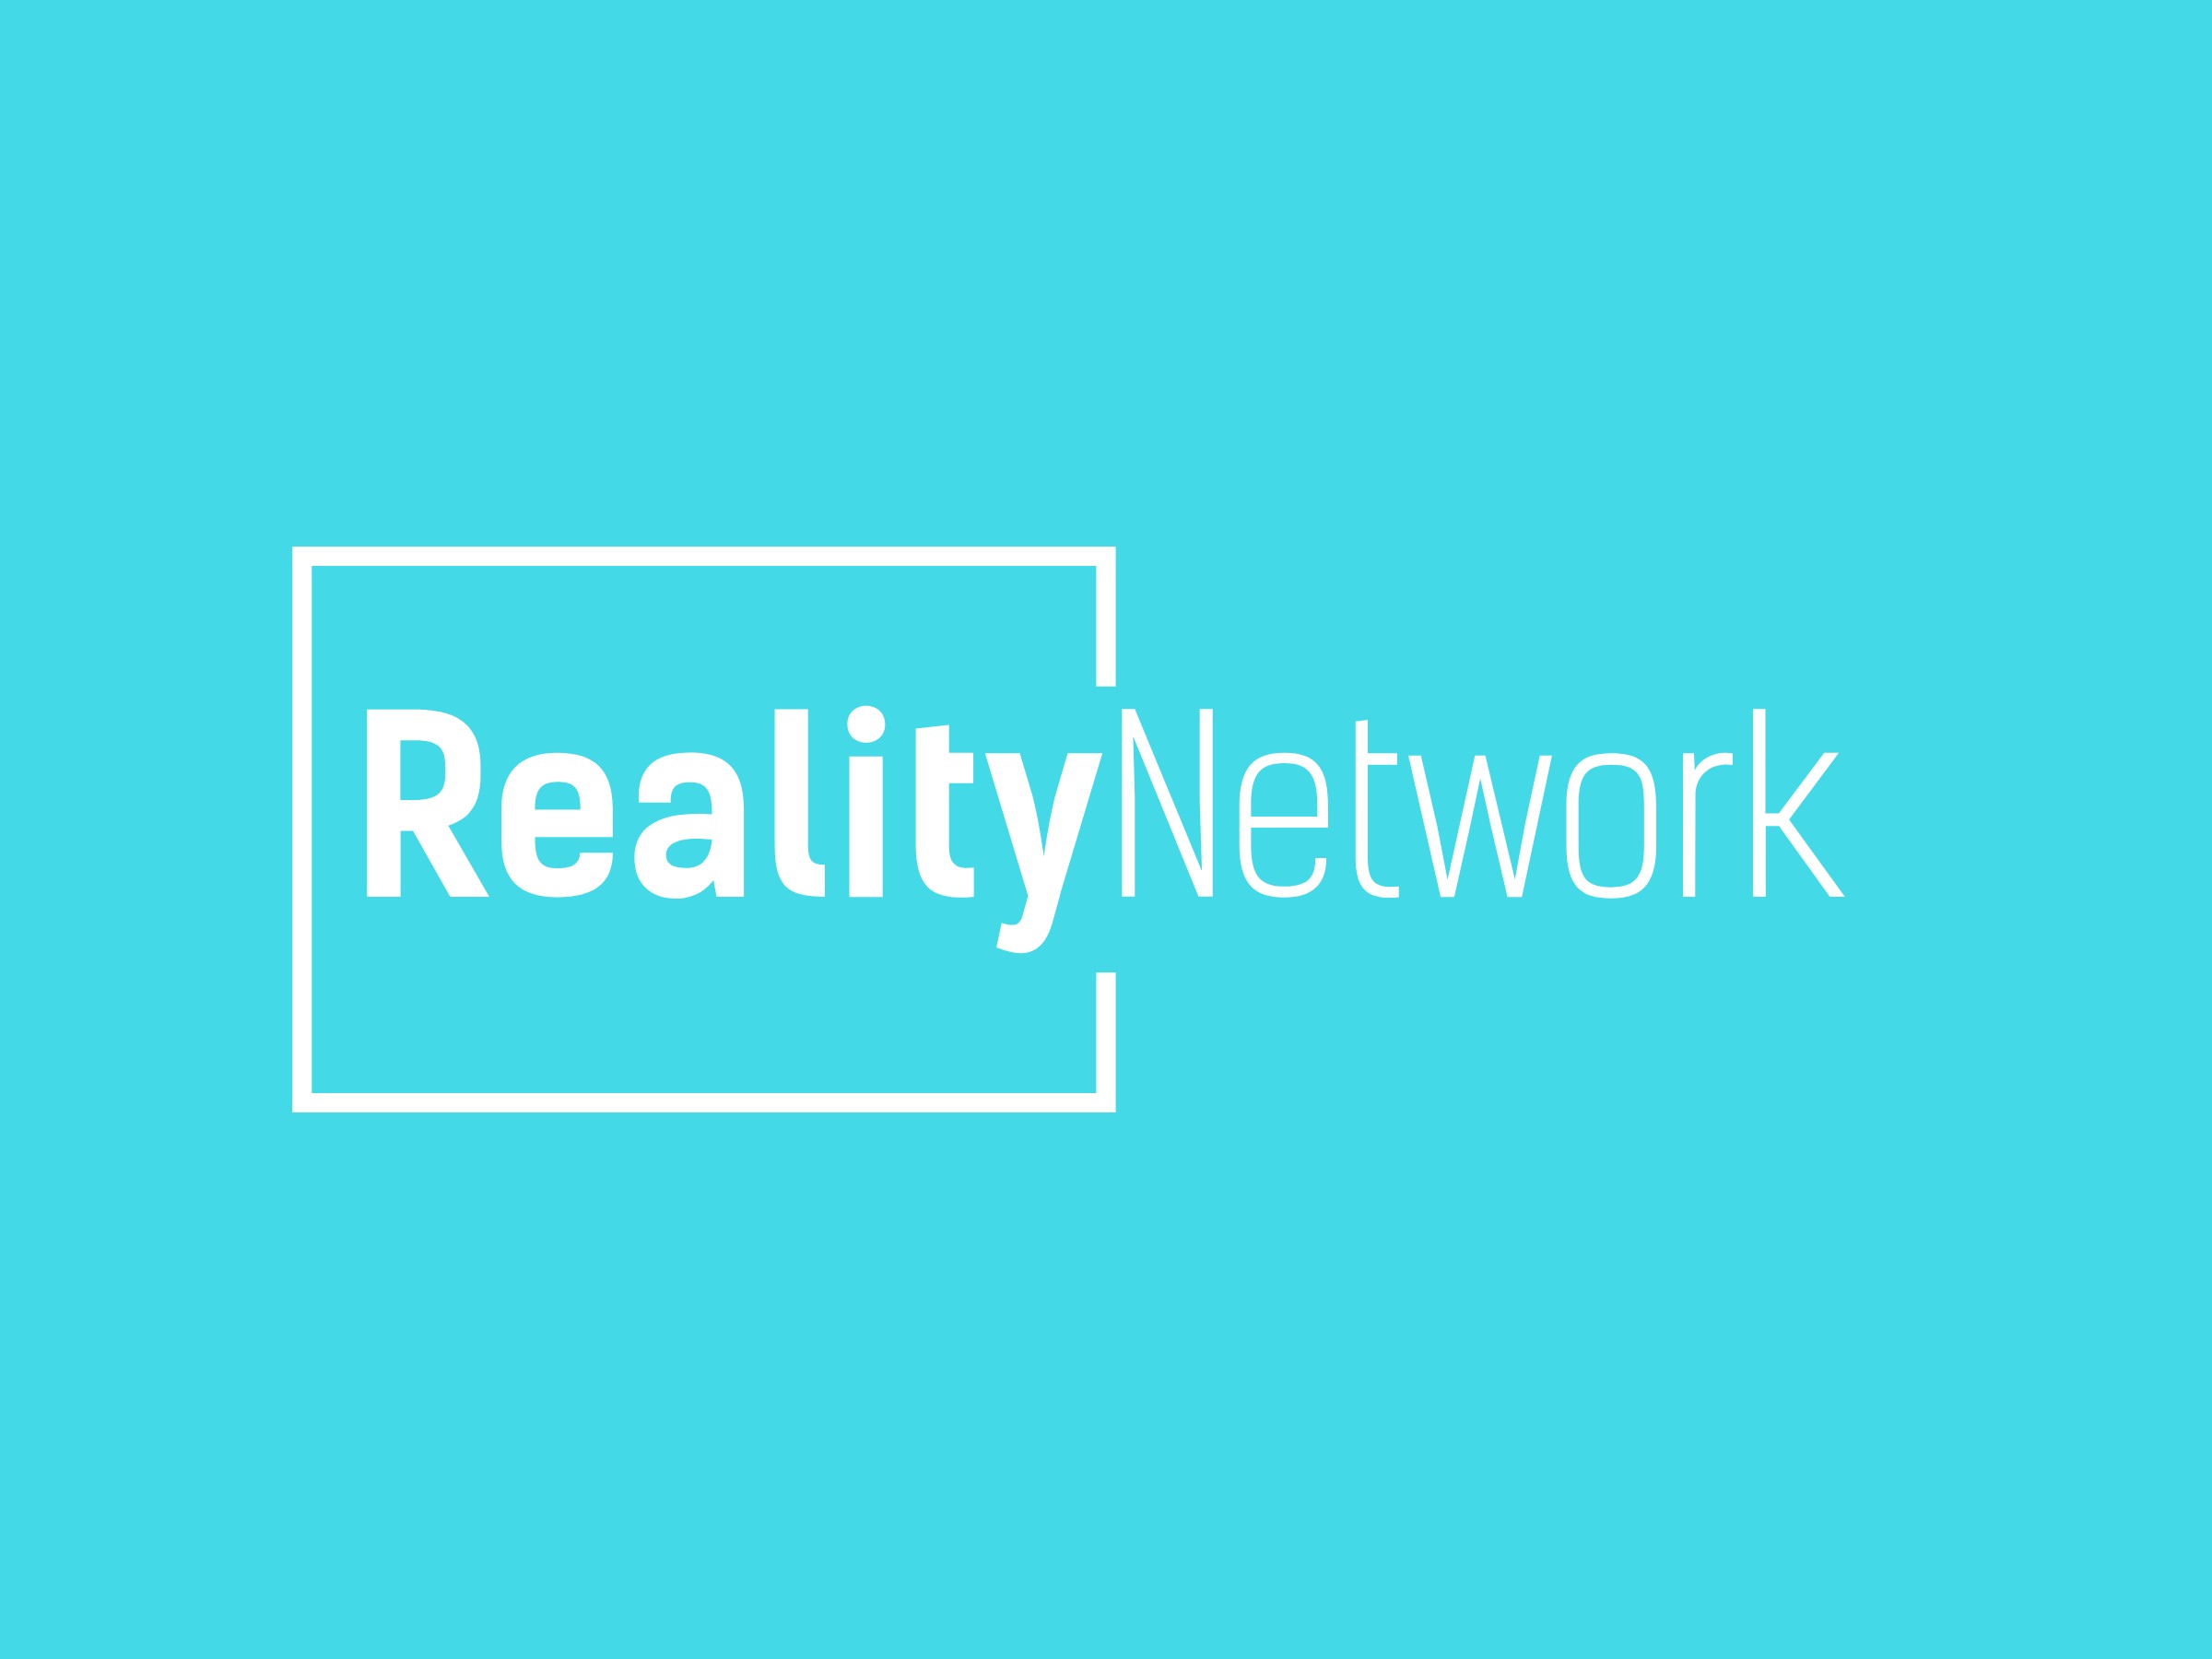 Peter Madrigal launches Reality Network on Roku, Bringing Exciting New Reality Television Shows and News to a Global Audience